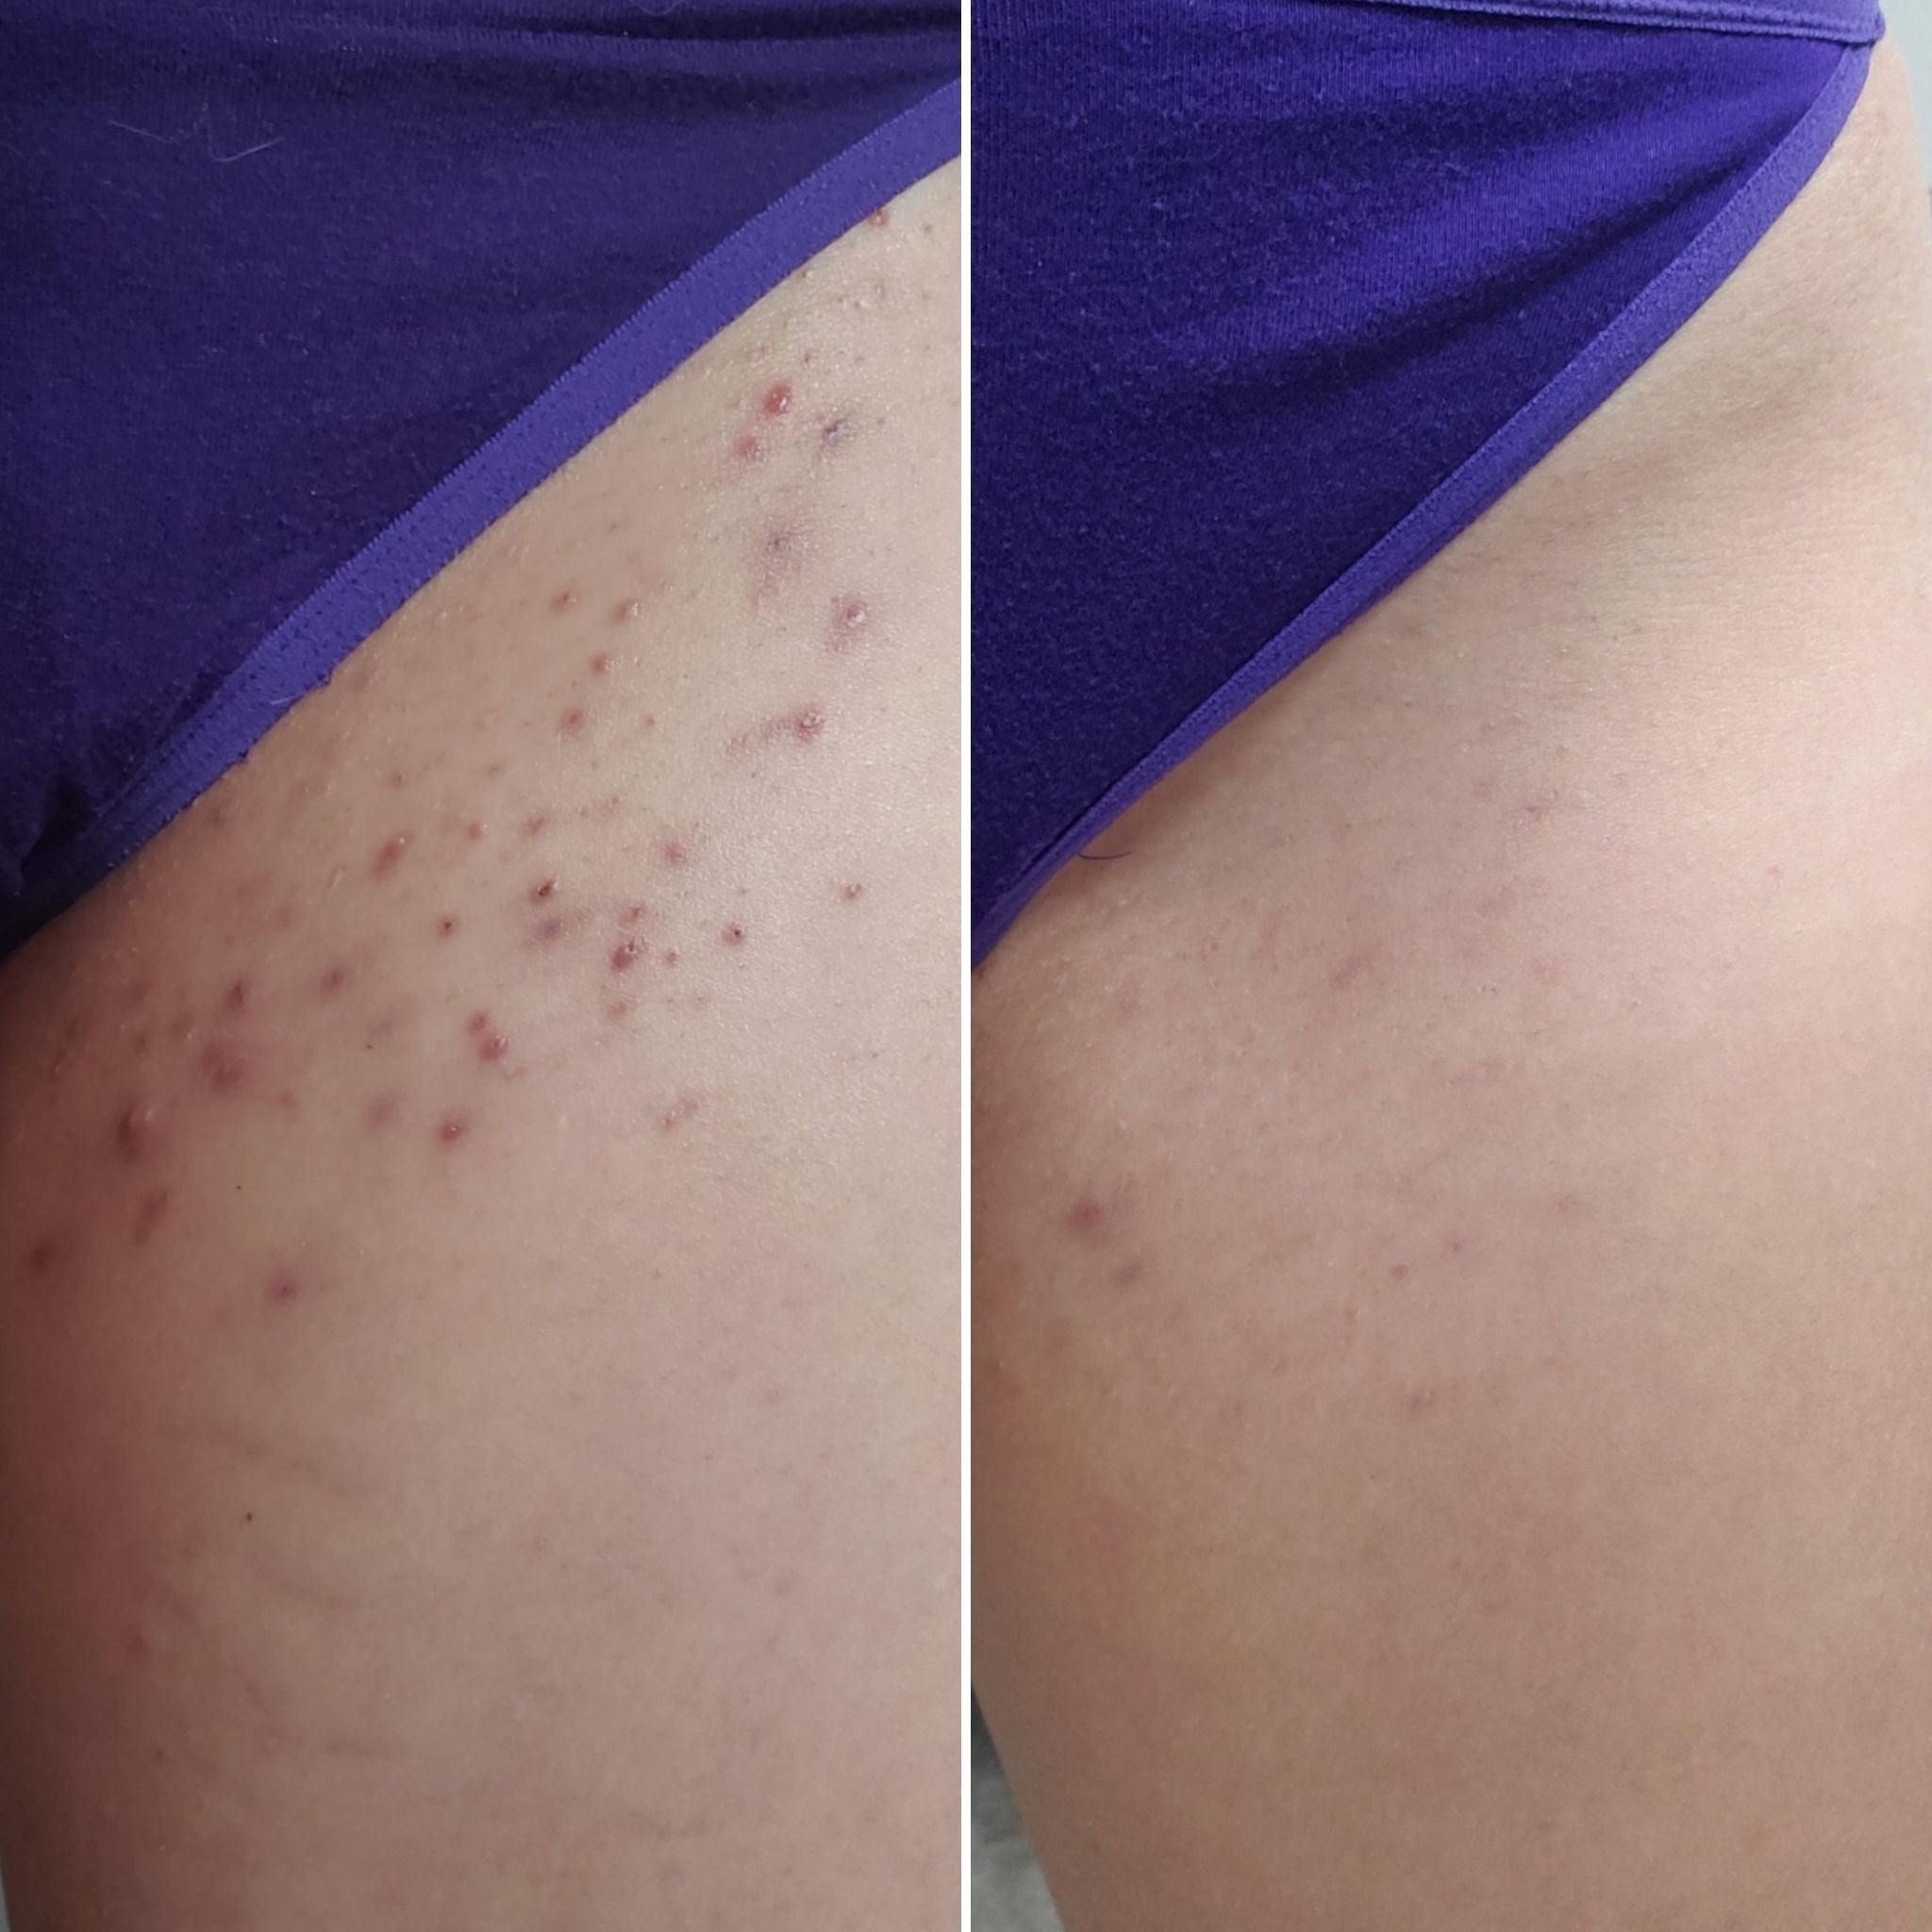 Before and after dark spots on the bikini line down there